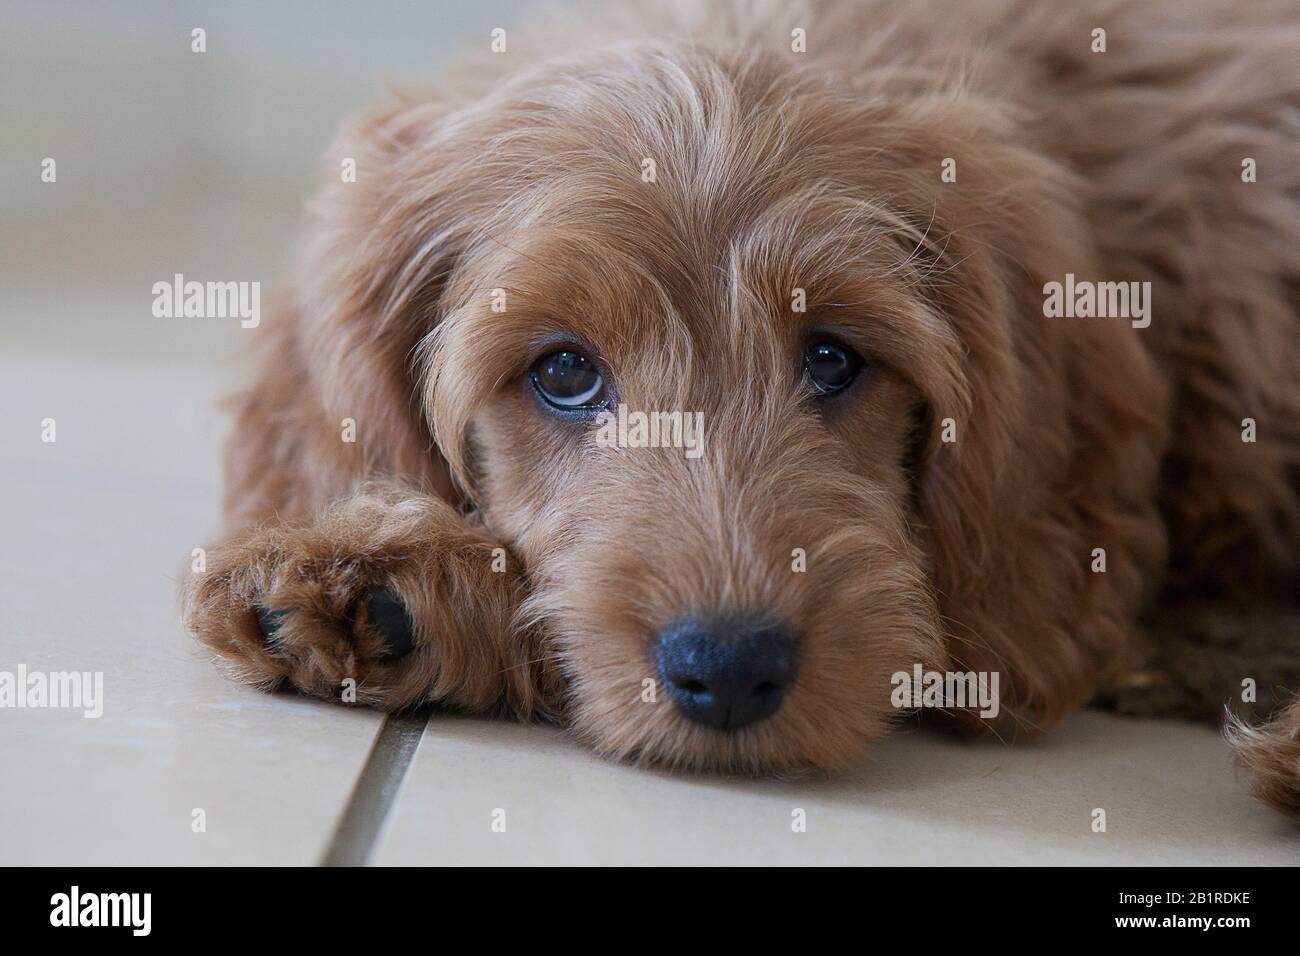 An 11-week-old red cockapoo (Cocker Spaniel x Miniature Poodle designer breed) puppy with brown eyes rests on a tiled floor, looking at the camera. Stock Photo